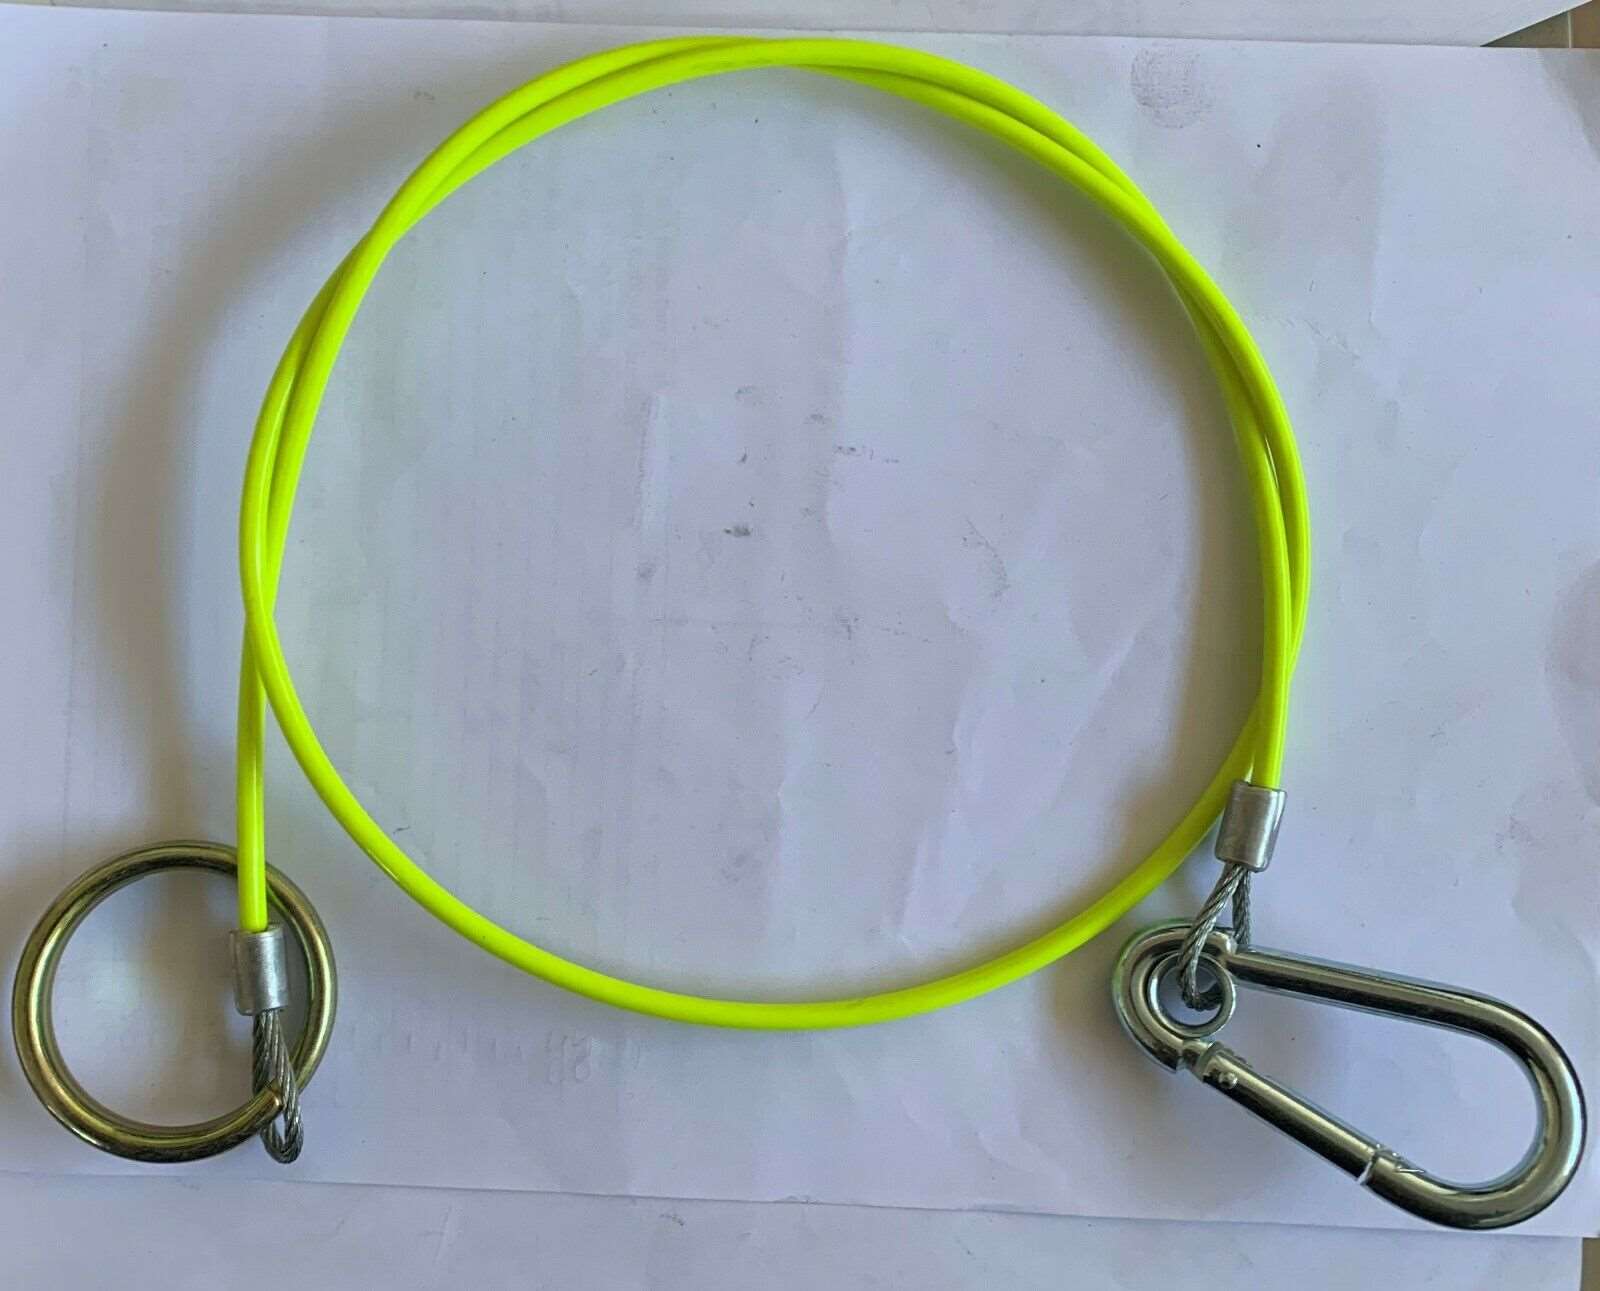 Fluorescent Yellow Breakaway Cable suits Trailers and Caravans